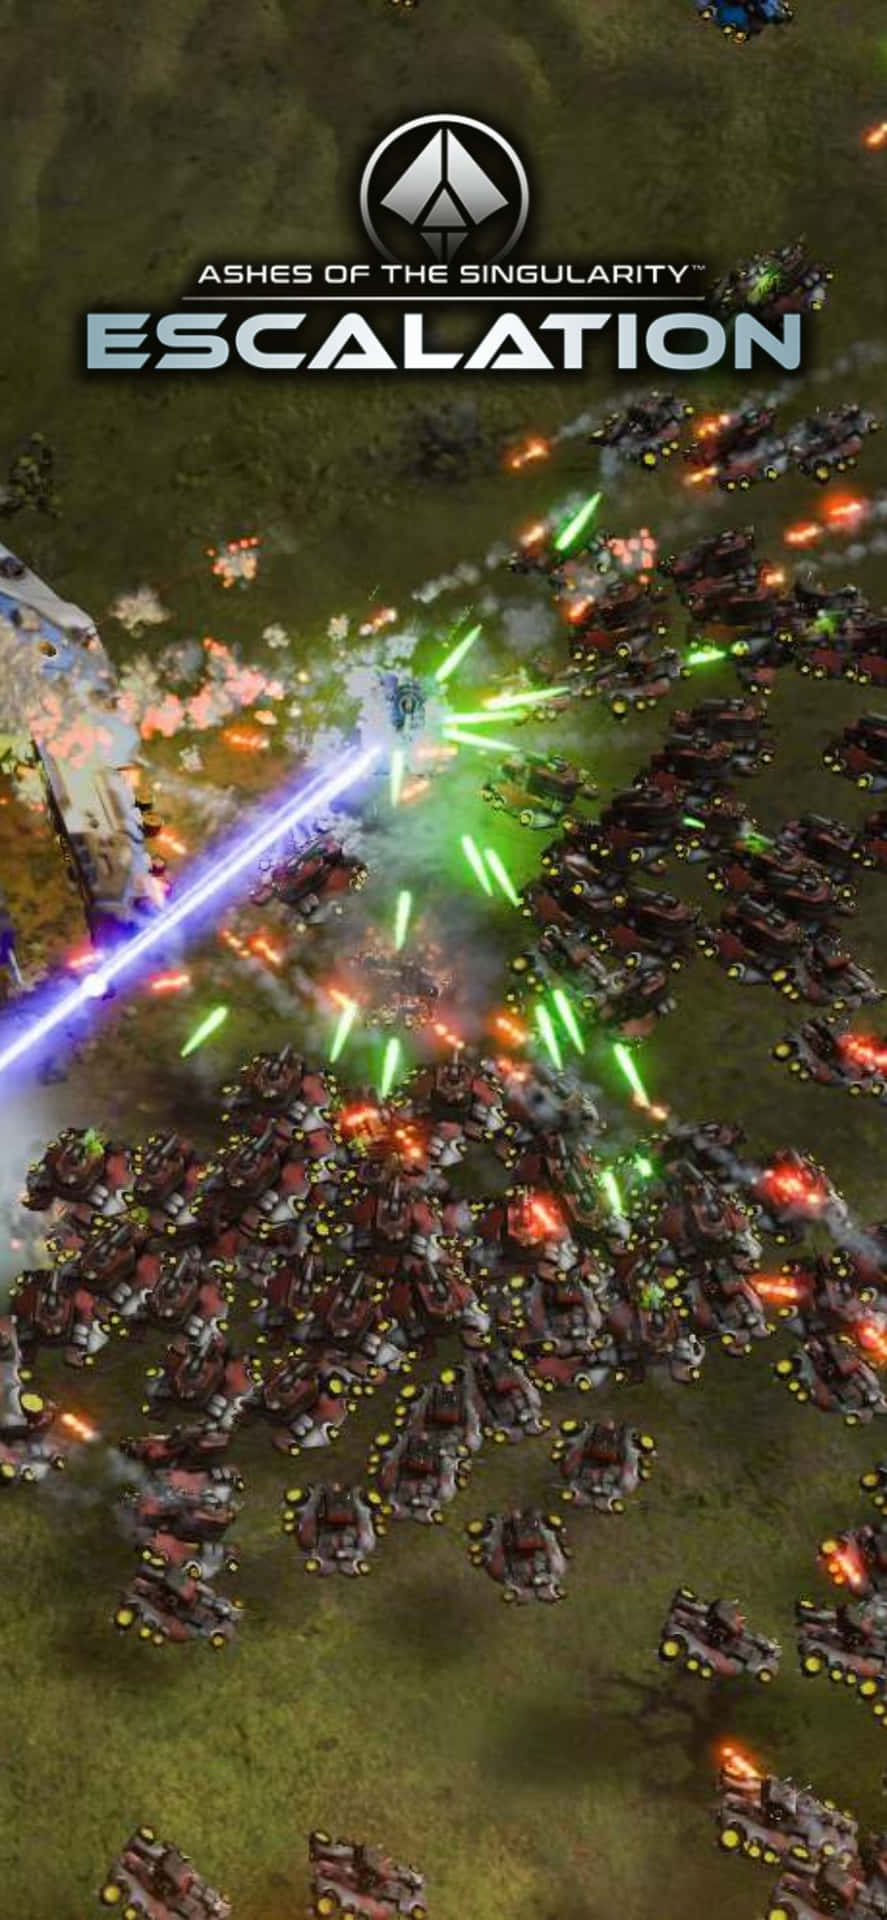 Erövragalaxen Med Iphone X:s Ashes Of The Singularity Escalation.